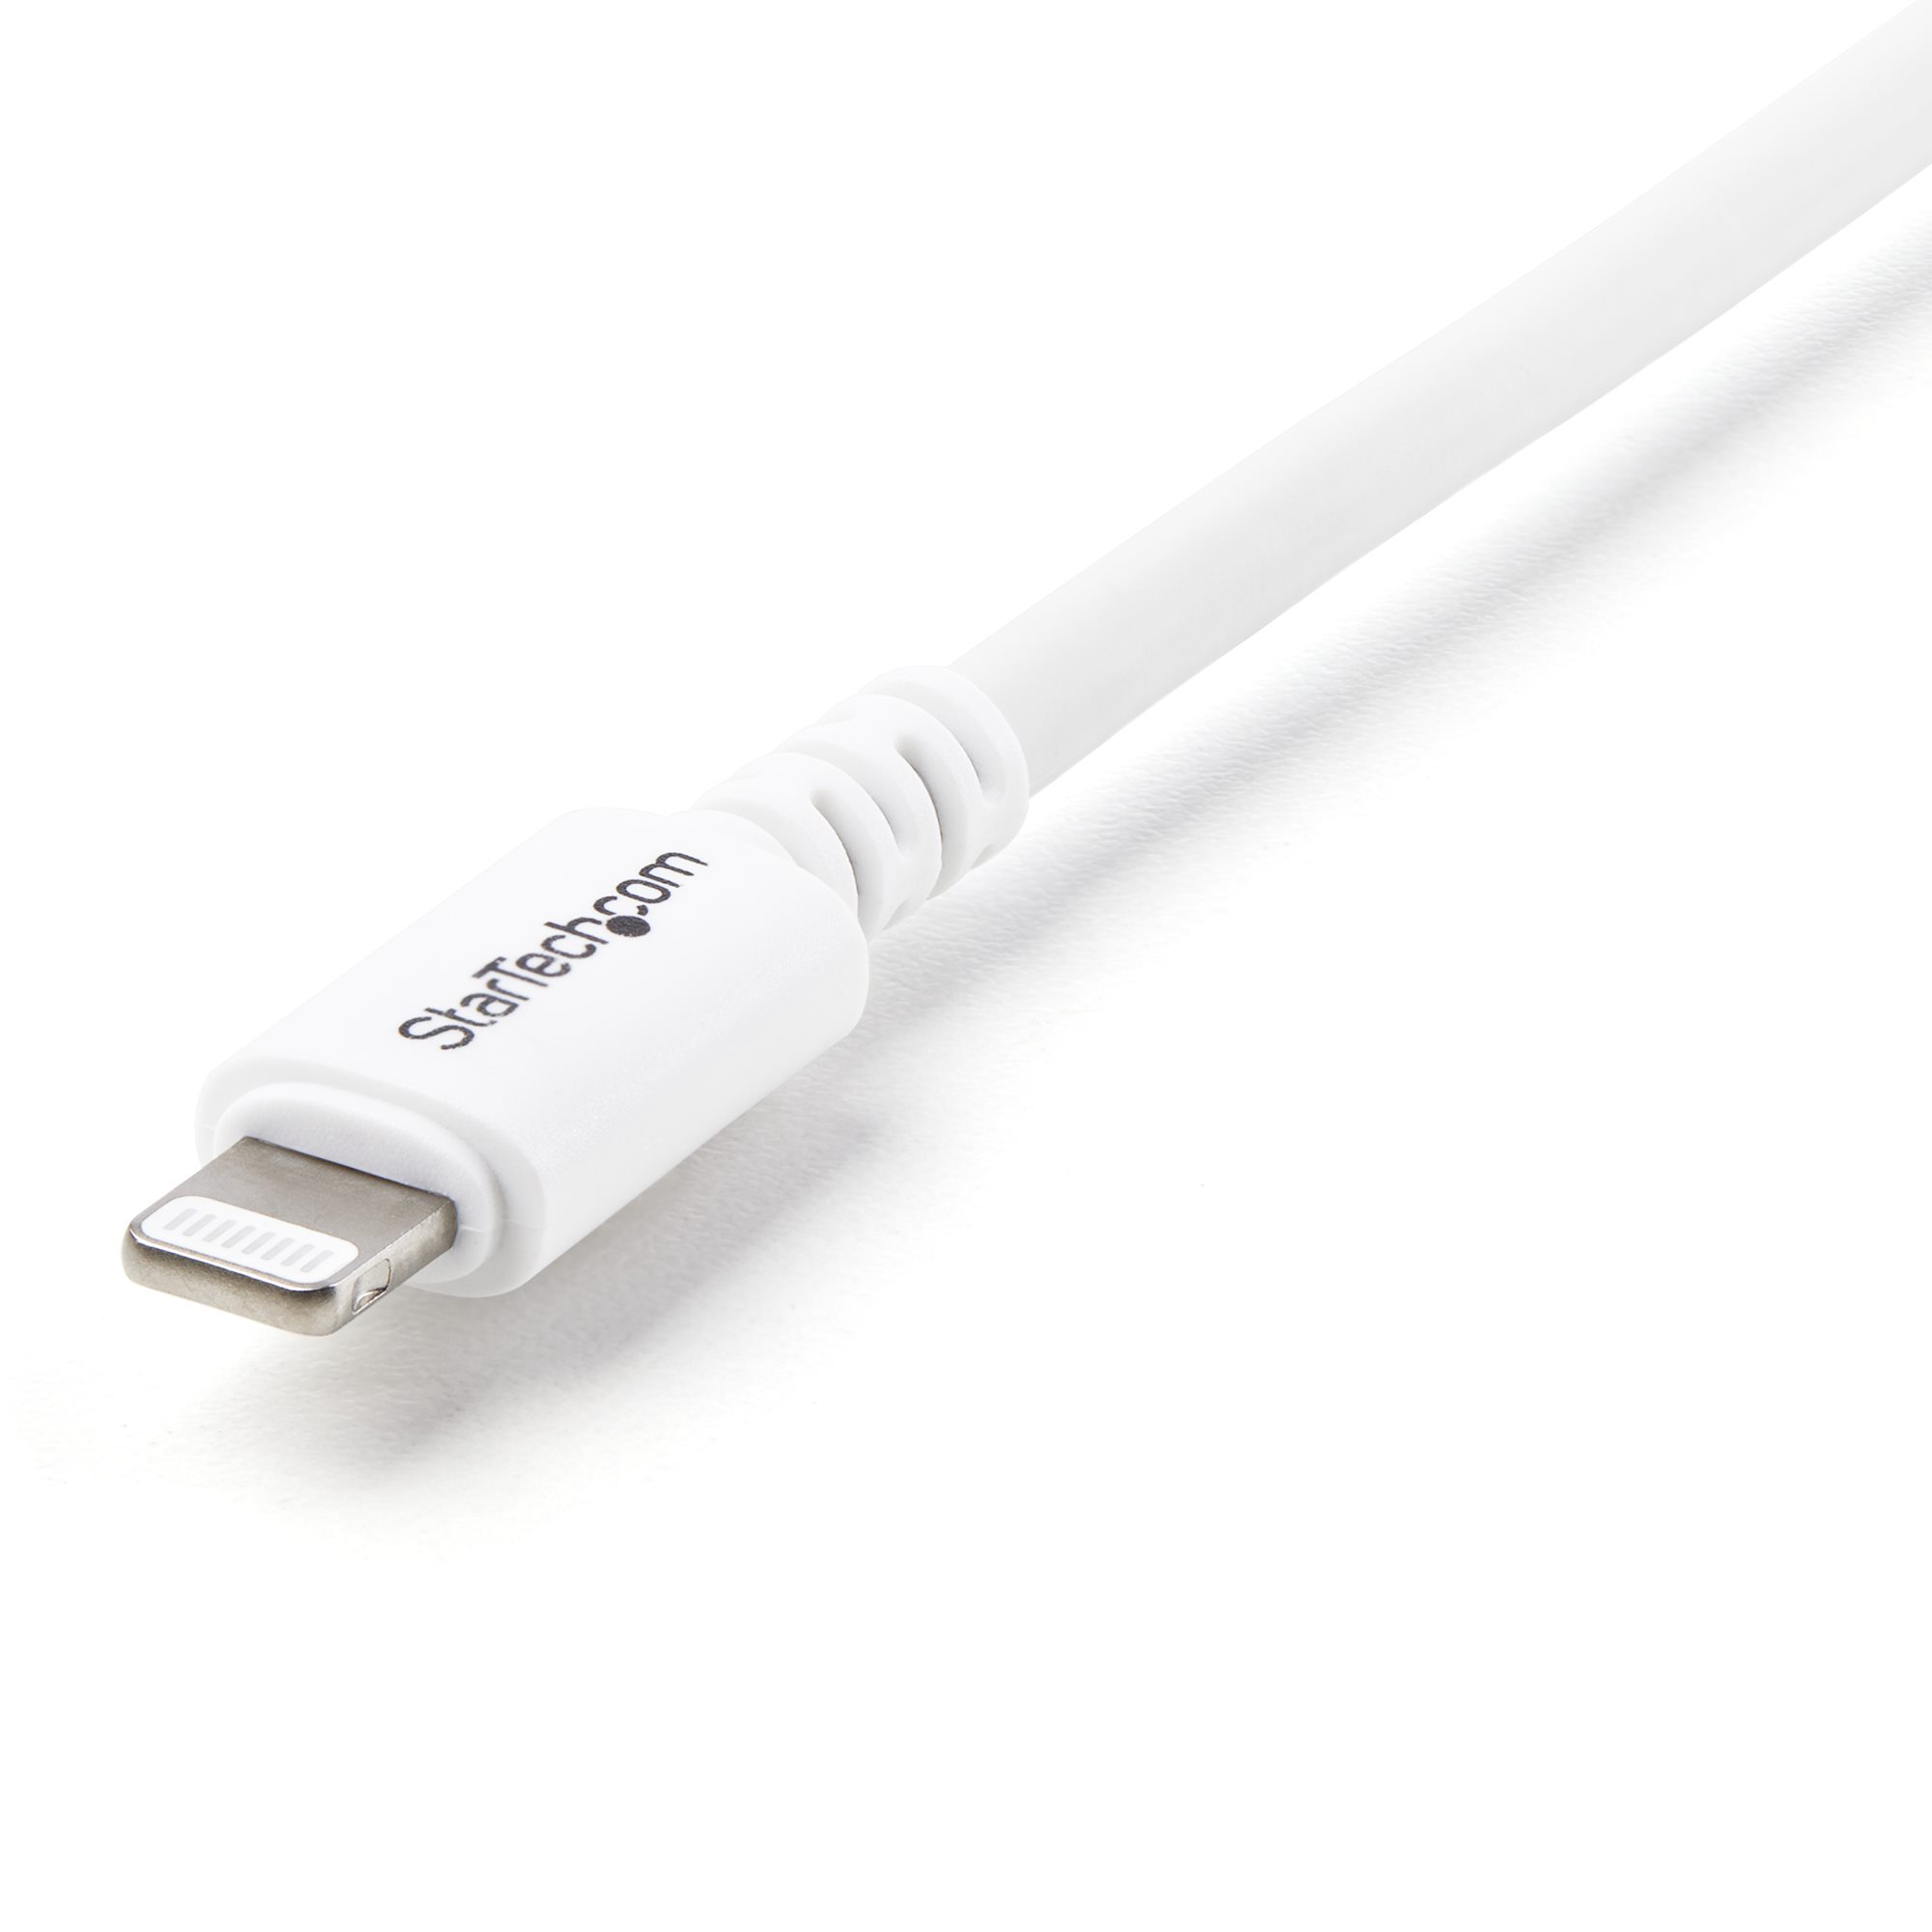 10 ft White 8-pin Lightning to USB Cable - Lightning Cables